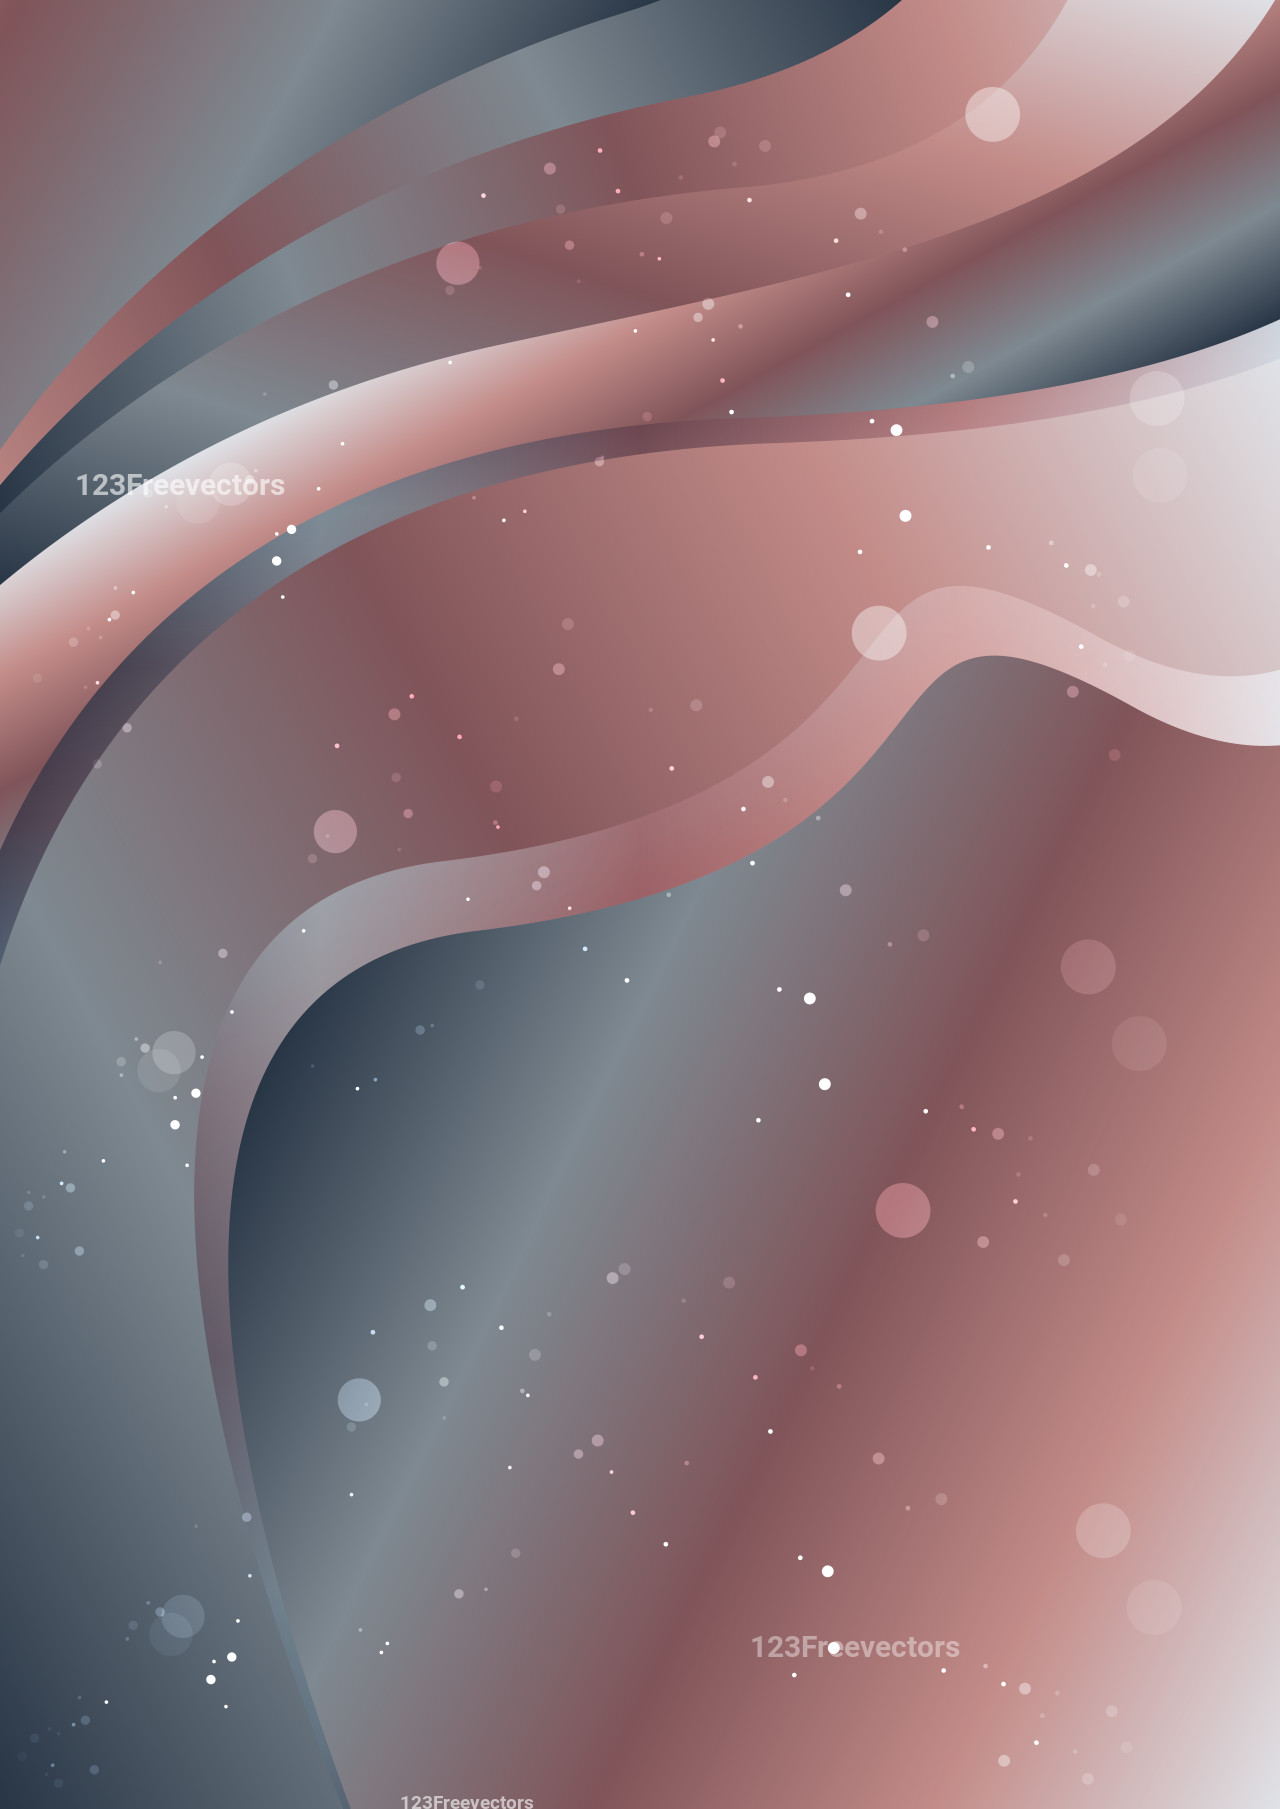 Abstract Red and Grey Gradient Wave Background